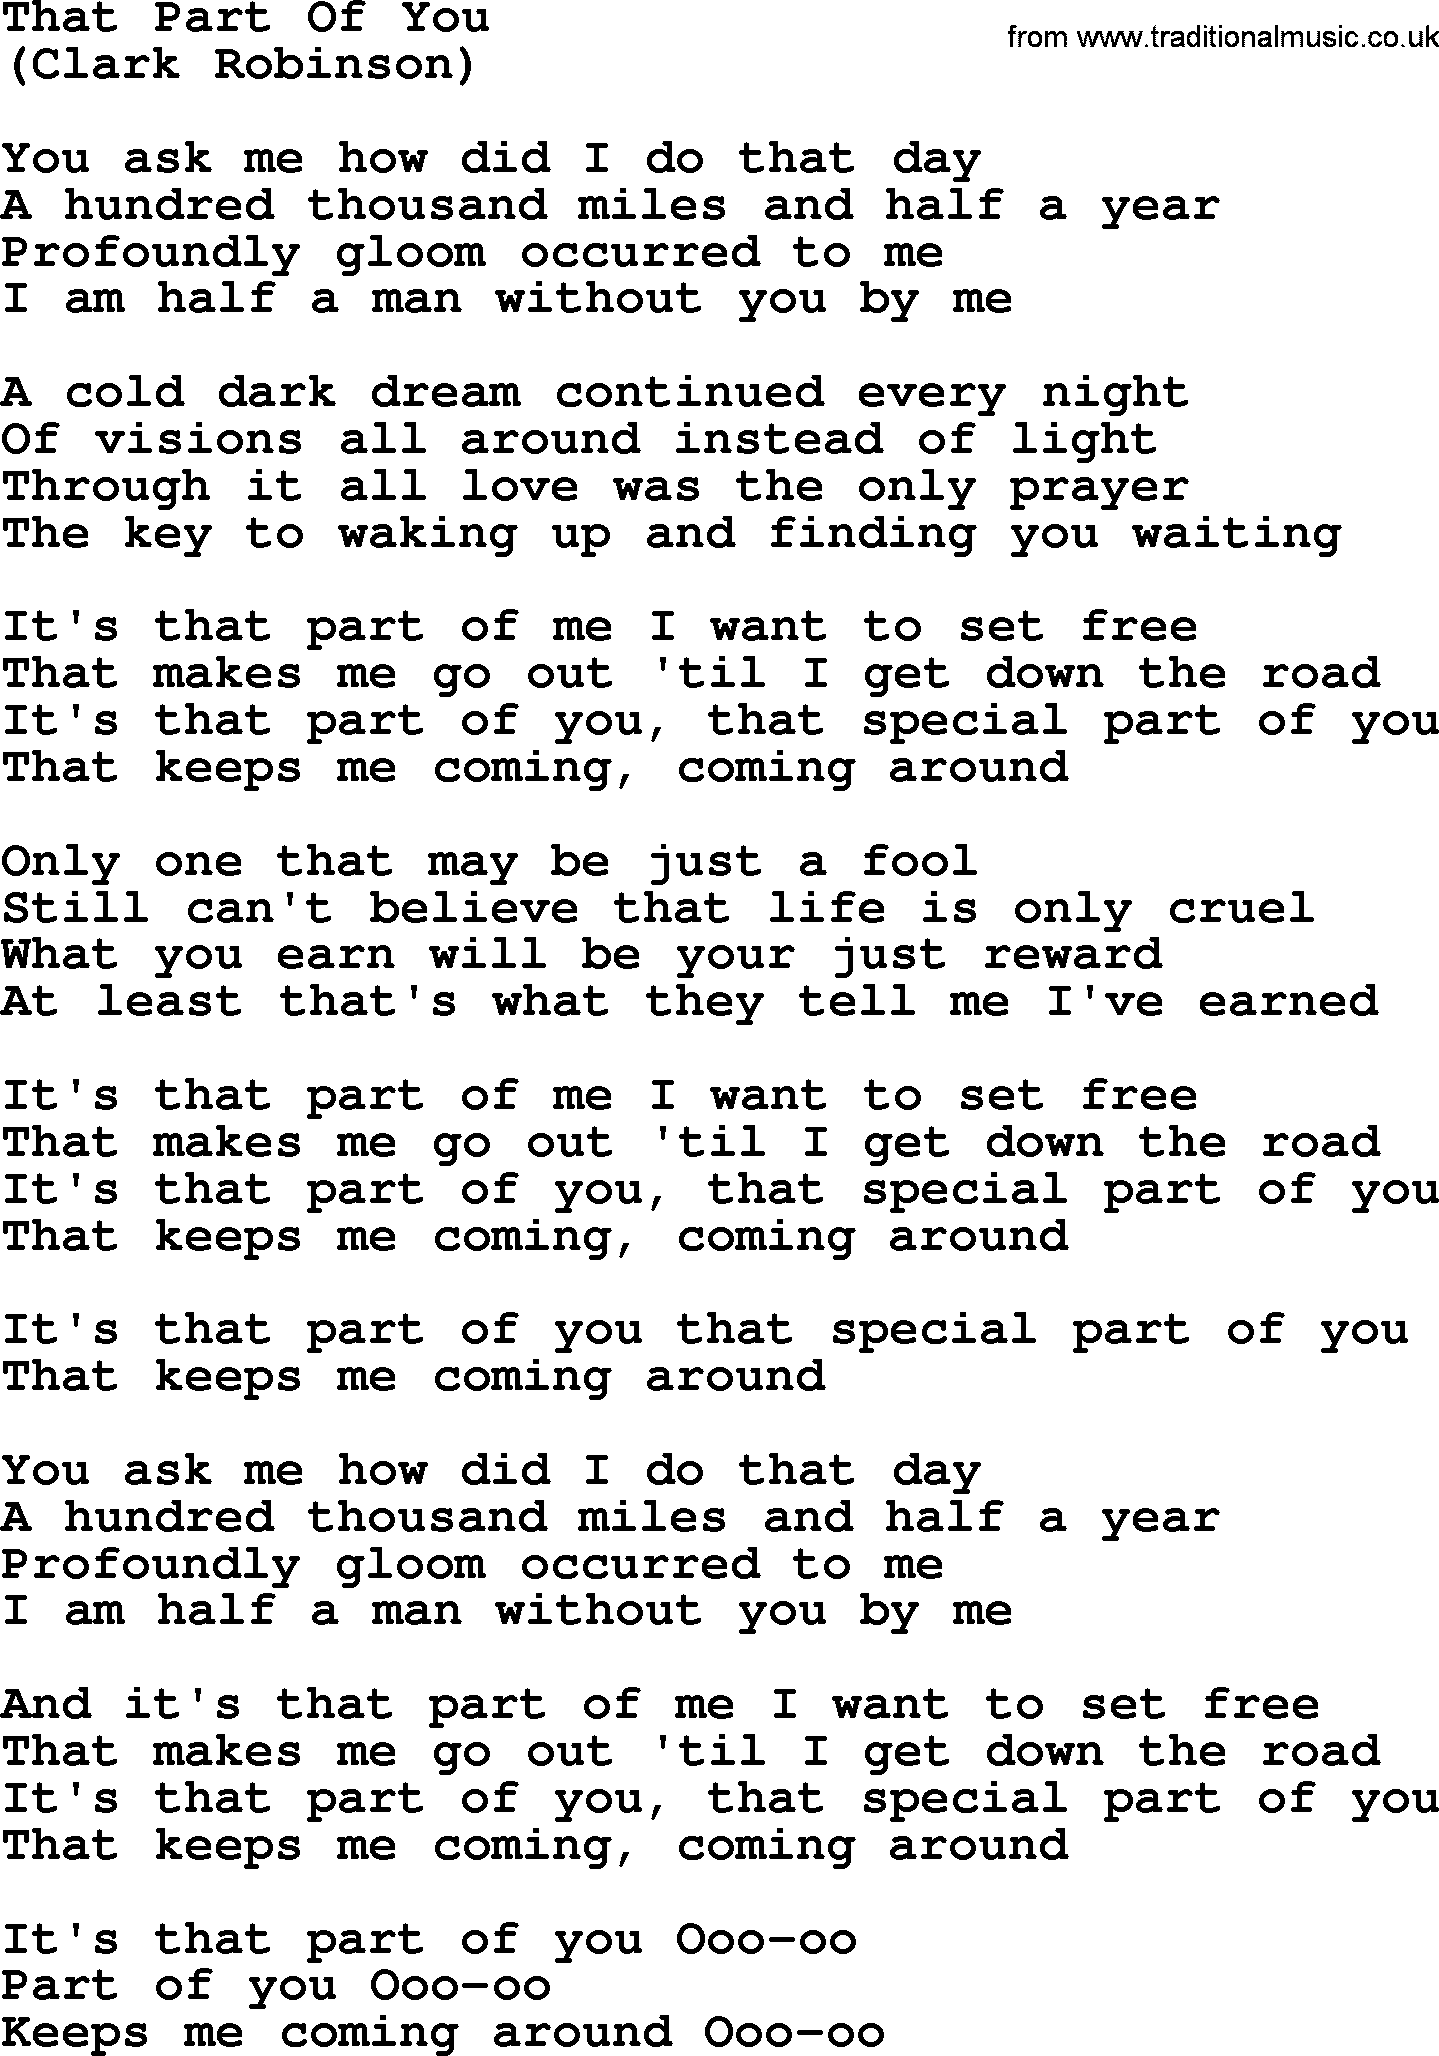 The Byrds song That Part Of You, lyrics